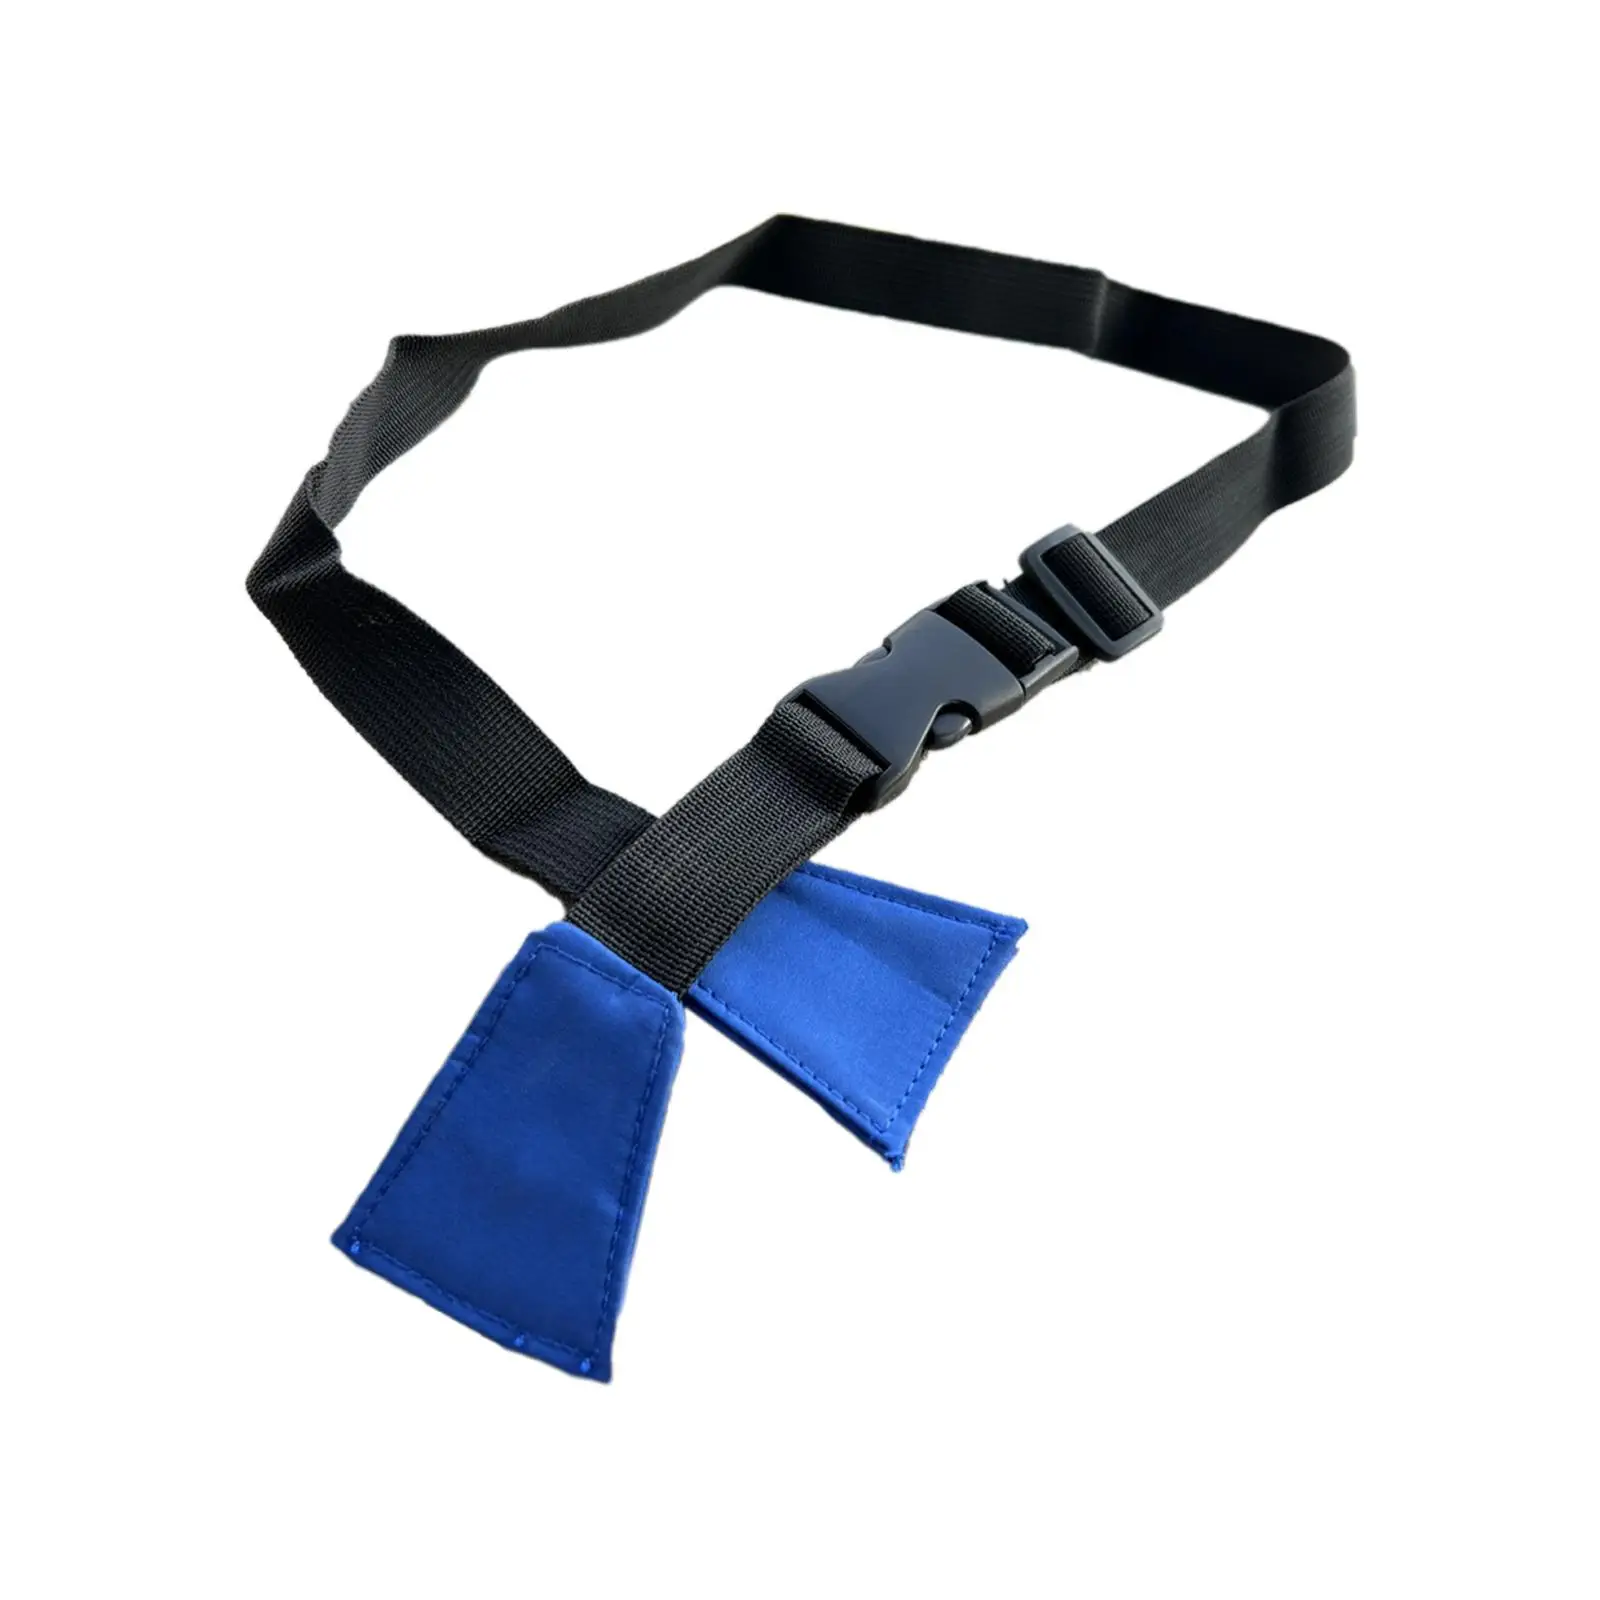 Backpack Chest Strap Adjustable Sternum Strap Webbing Non Slip with Quick